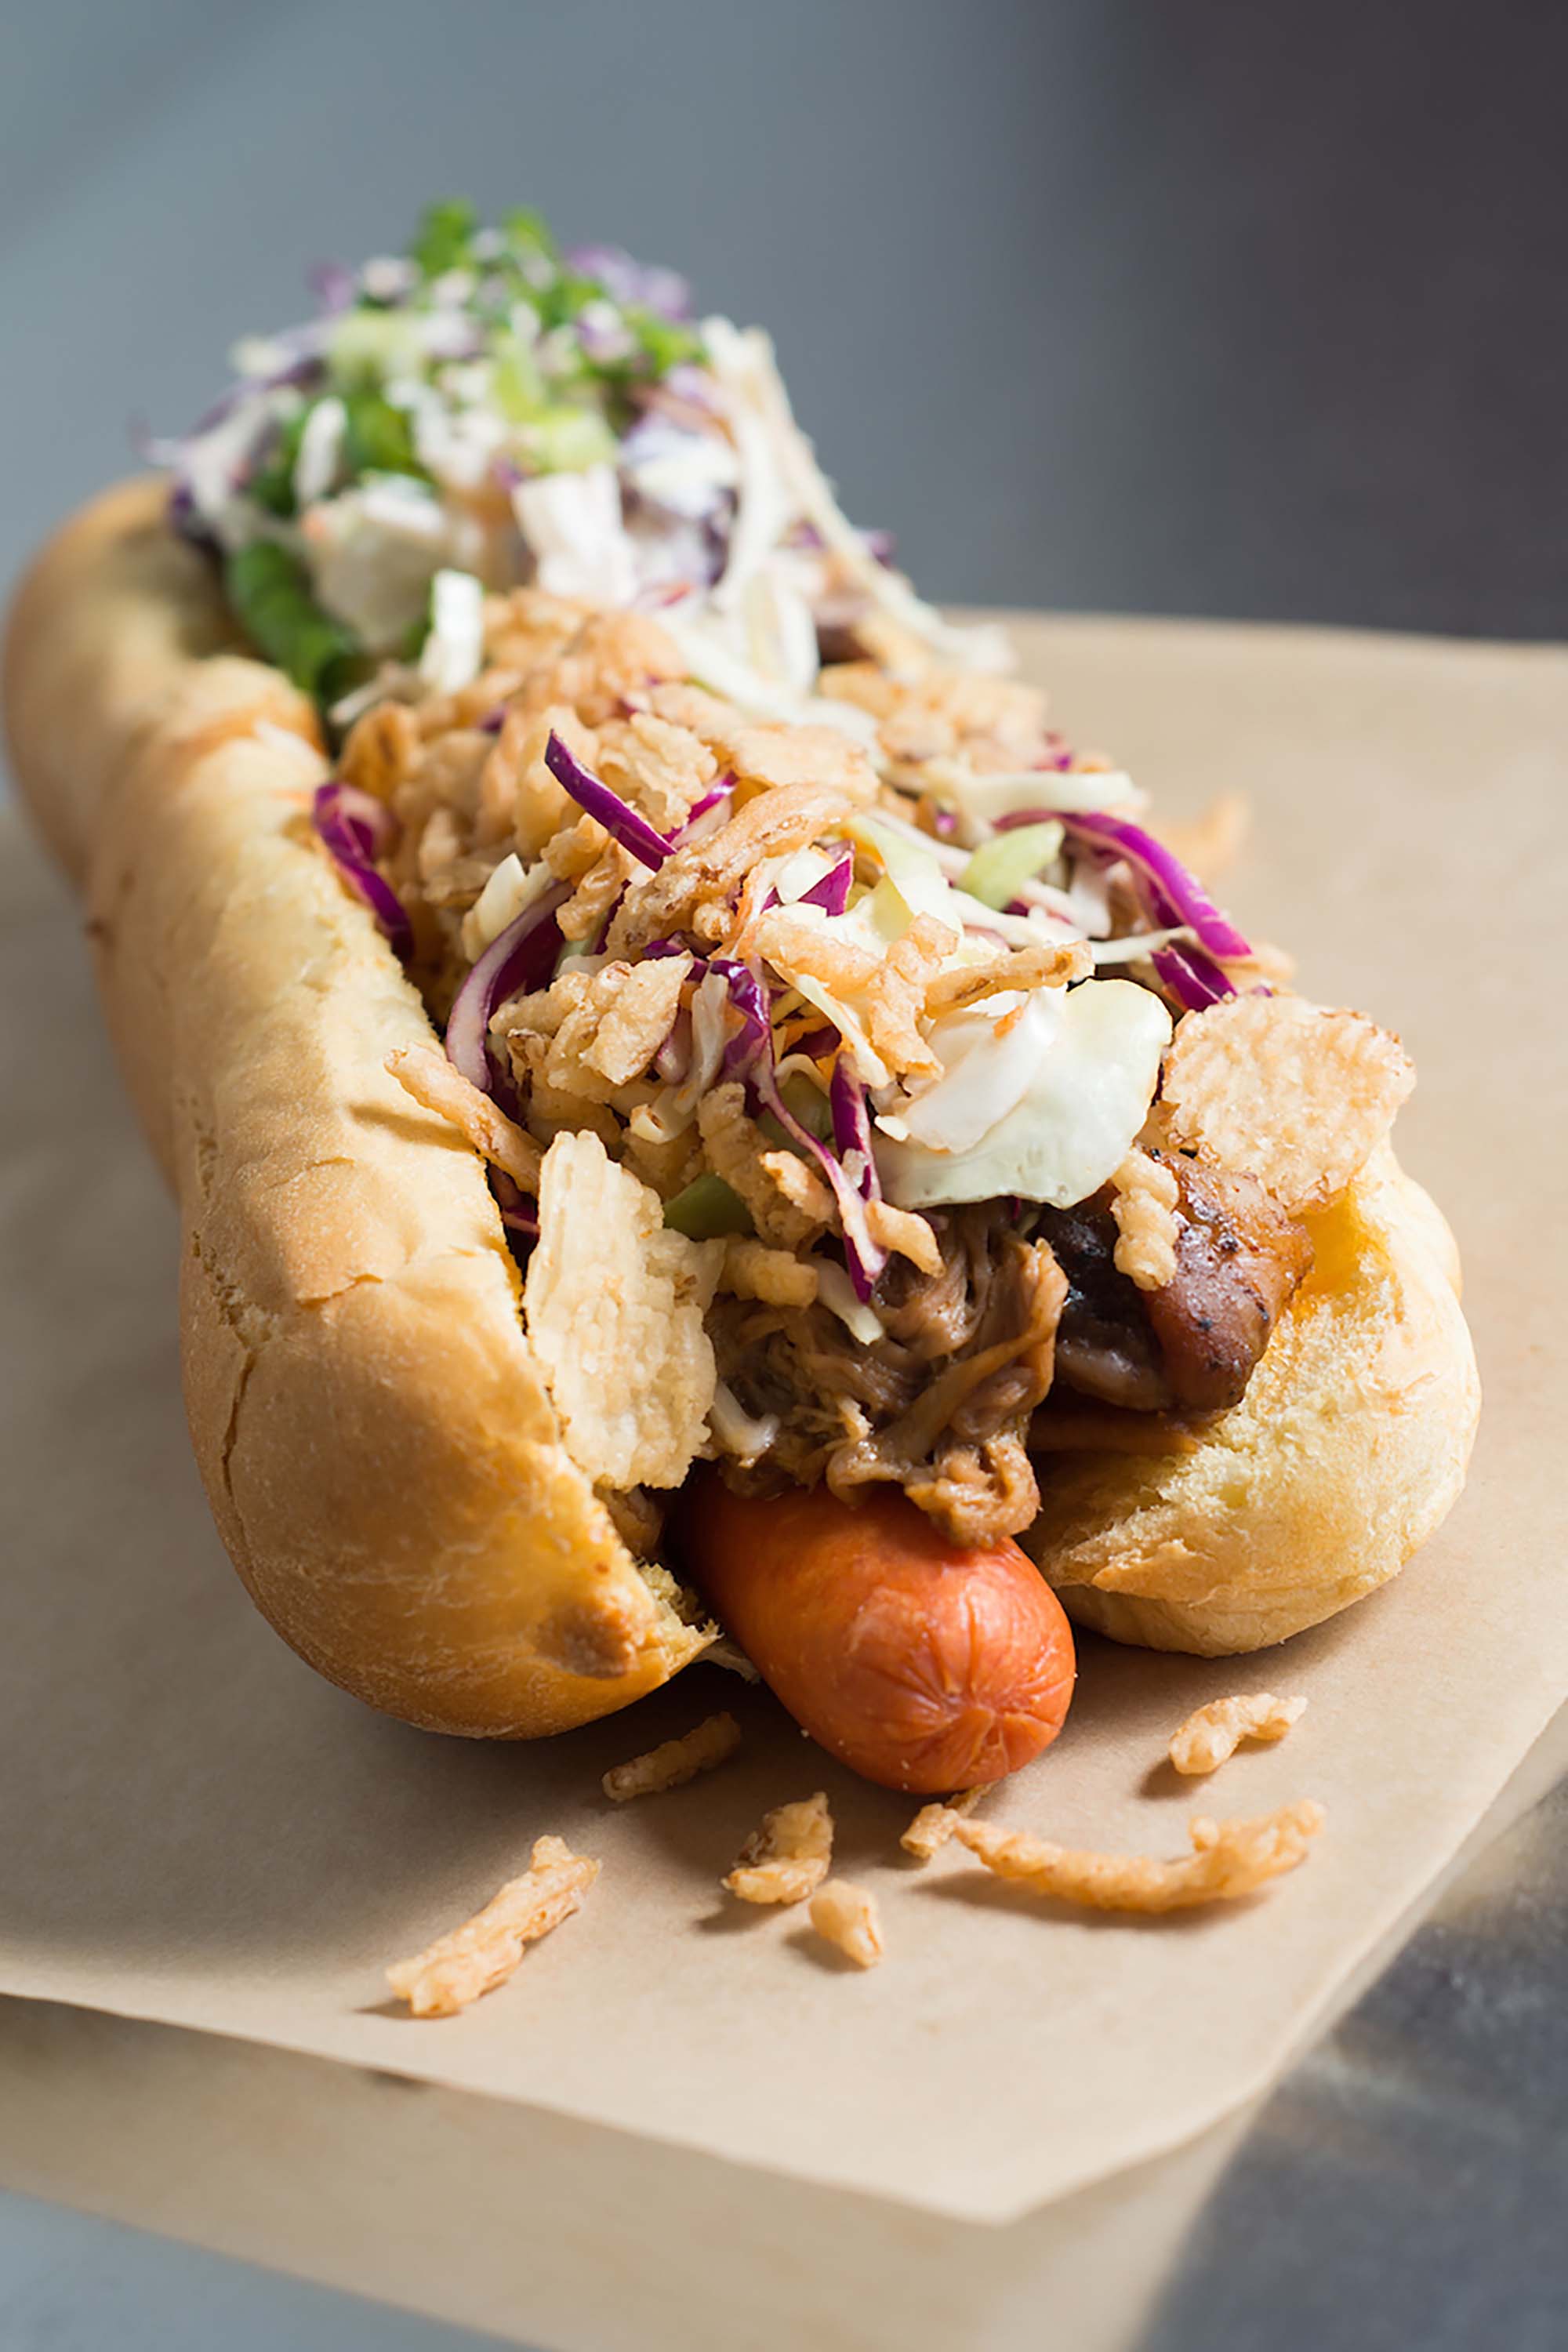 Hot diggity dog! Here are 7 local hot dog spots you can find in